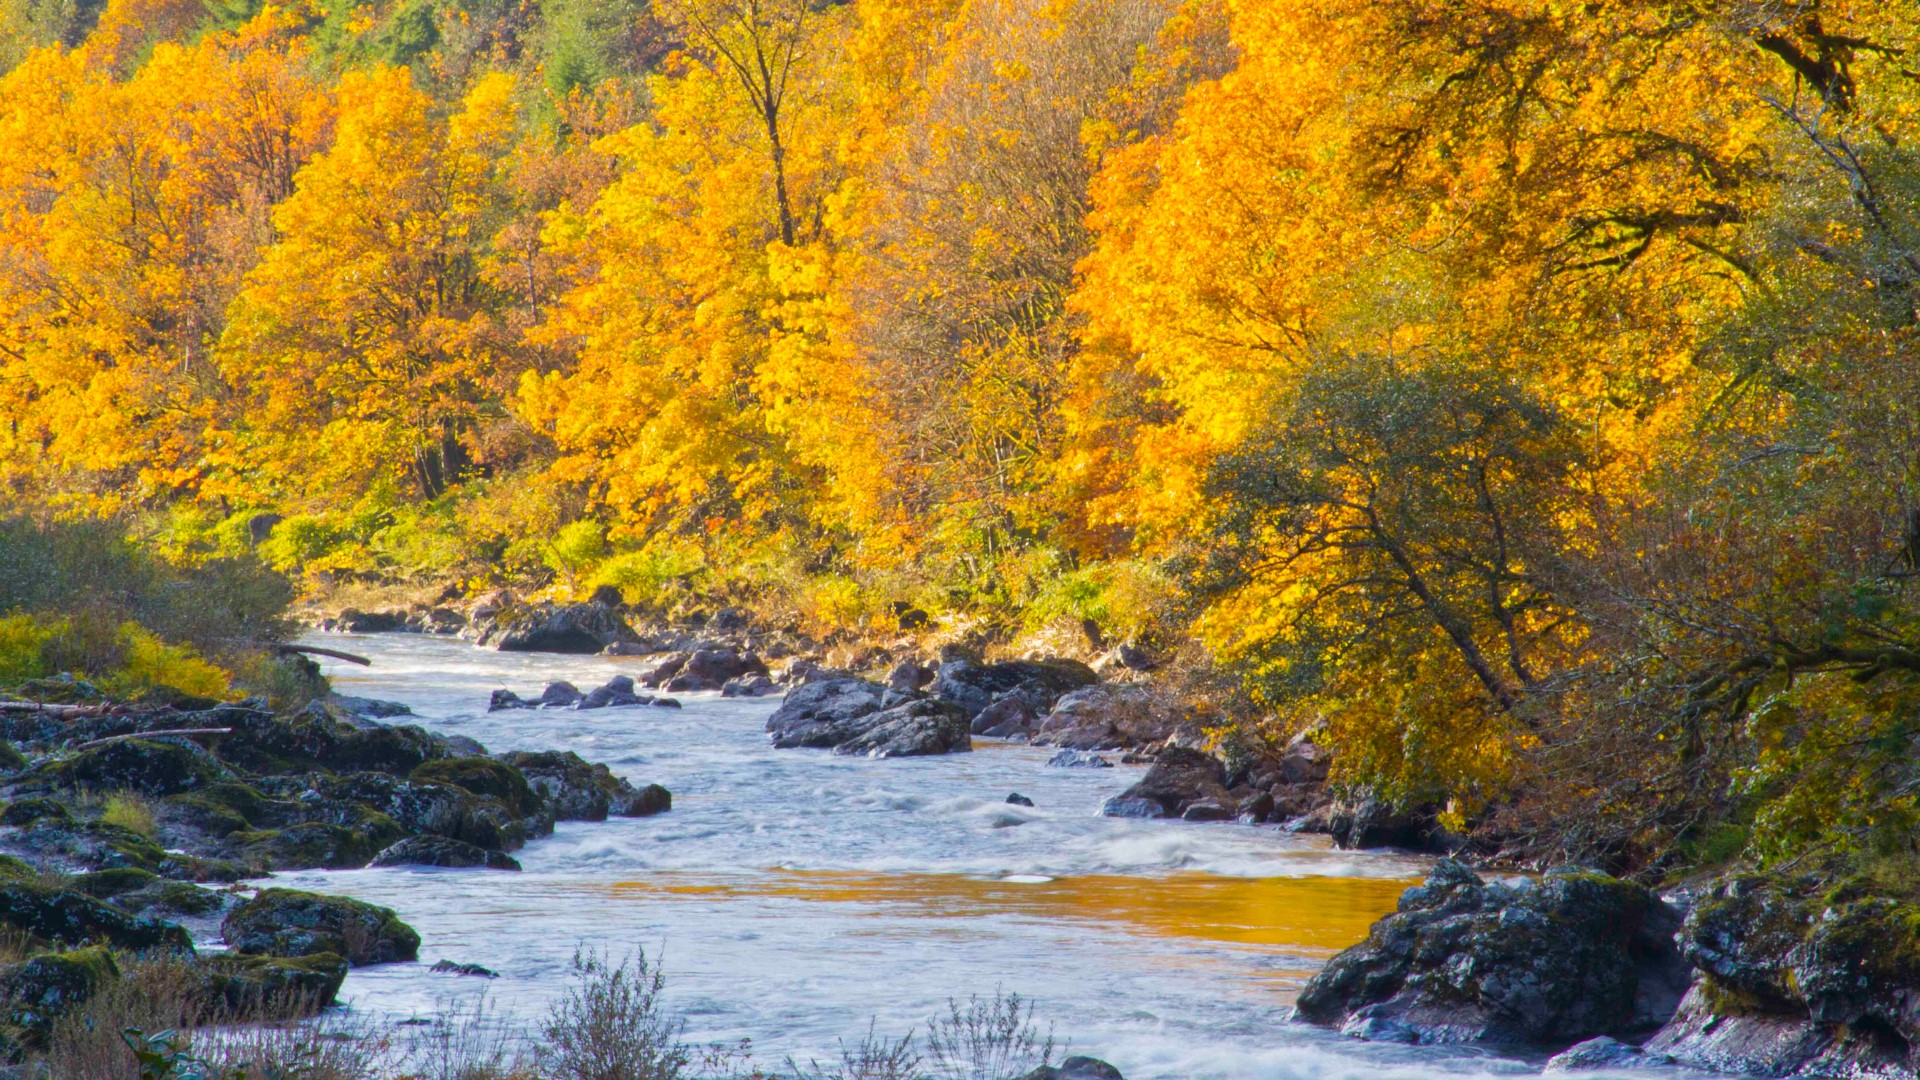 Grant McOmie travels along the Lower Nehalem River in Tillamook County for scenic views of spectacular fall colors.